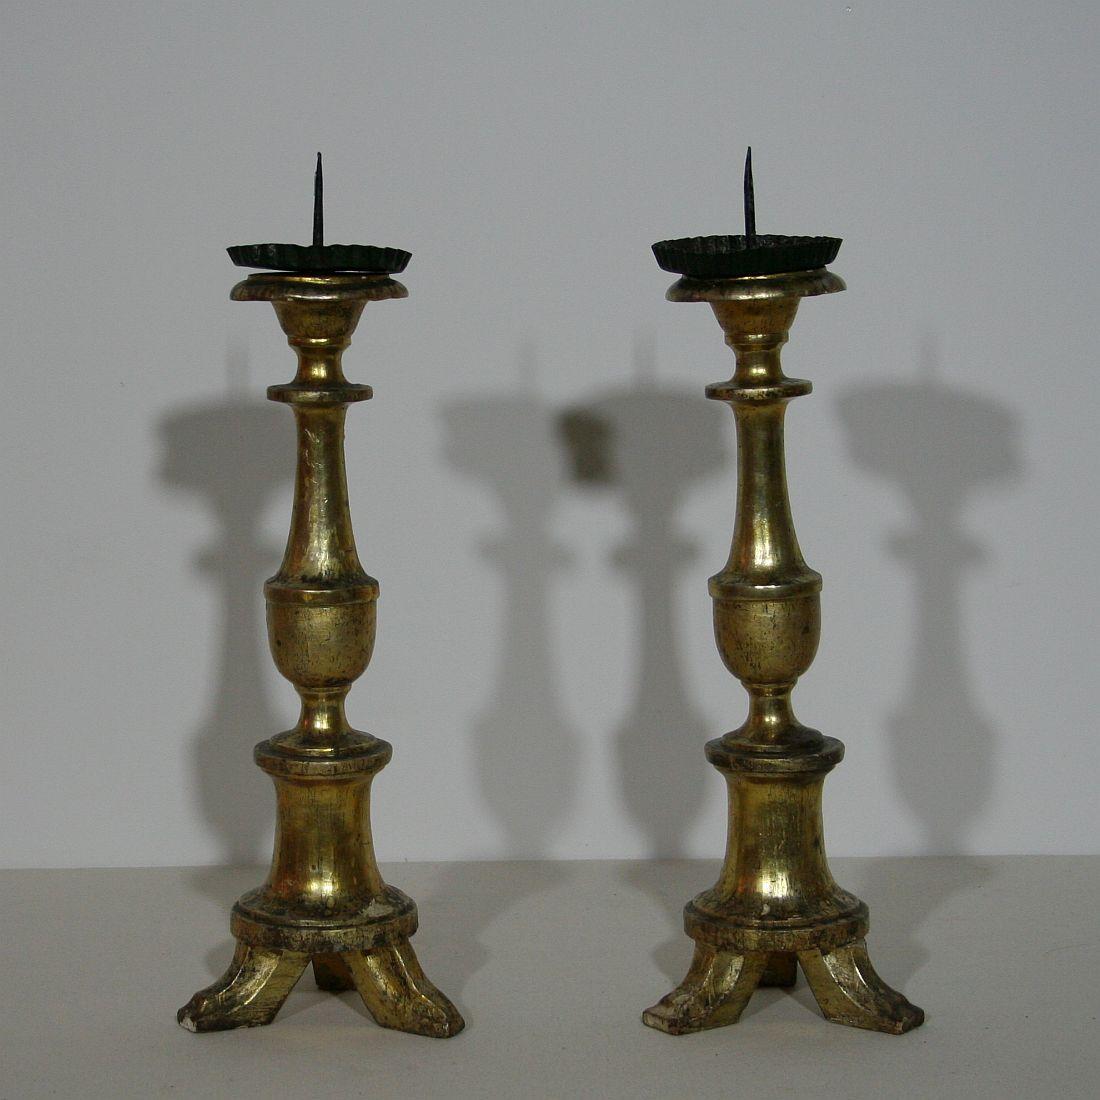 Neoclassical Pair of Late 18th-19th Century Italian Giltwood Candlesticks/ Candleholders